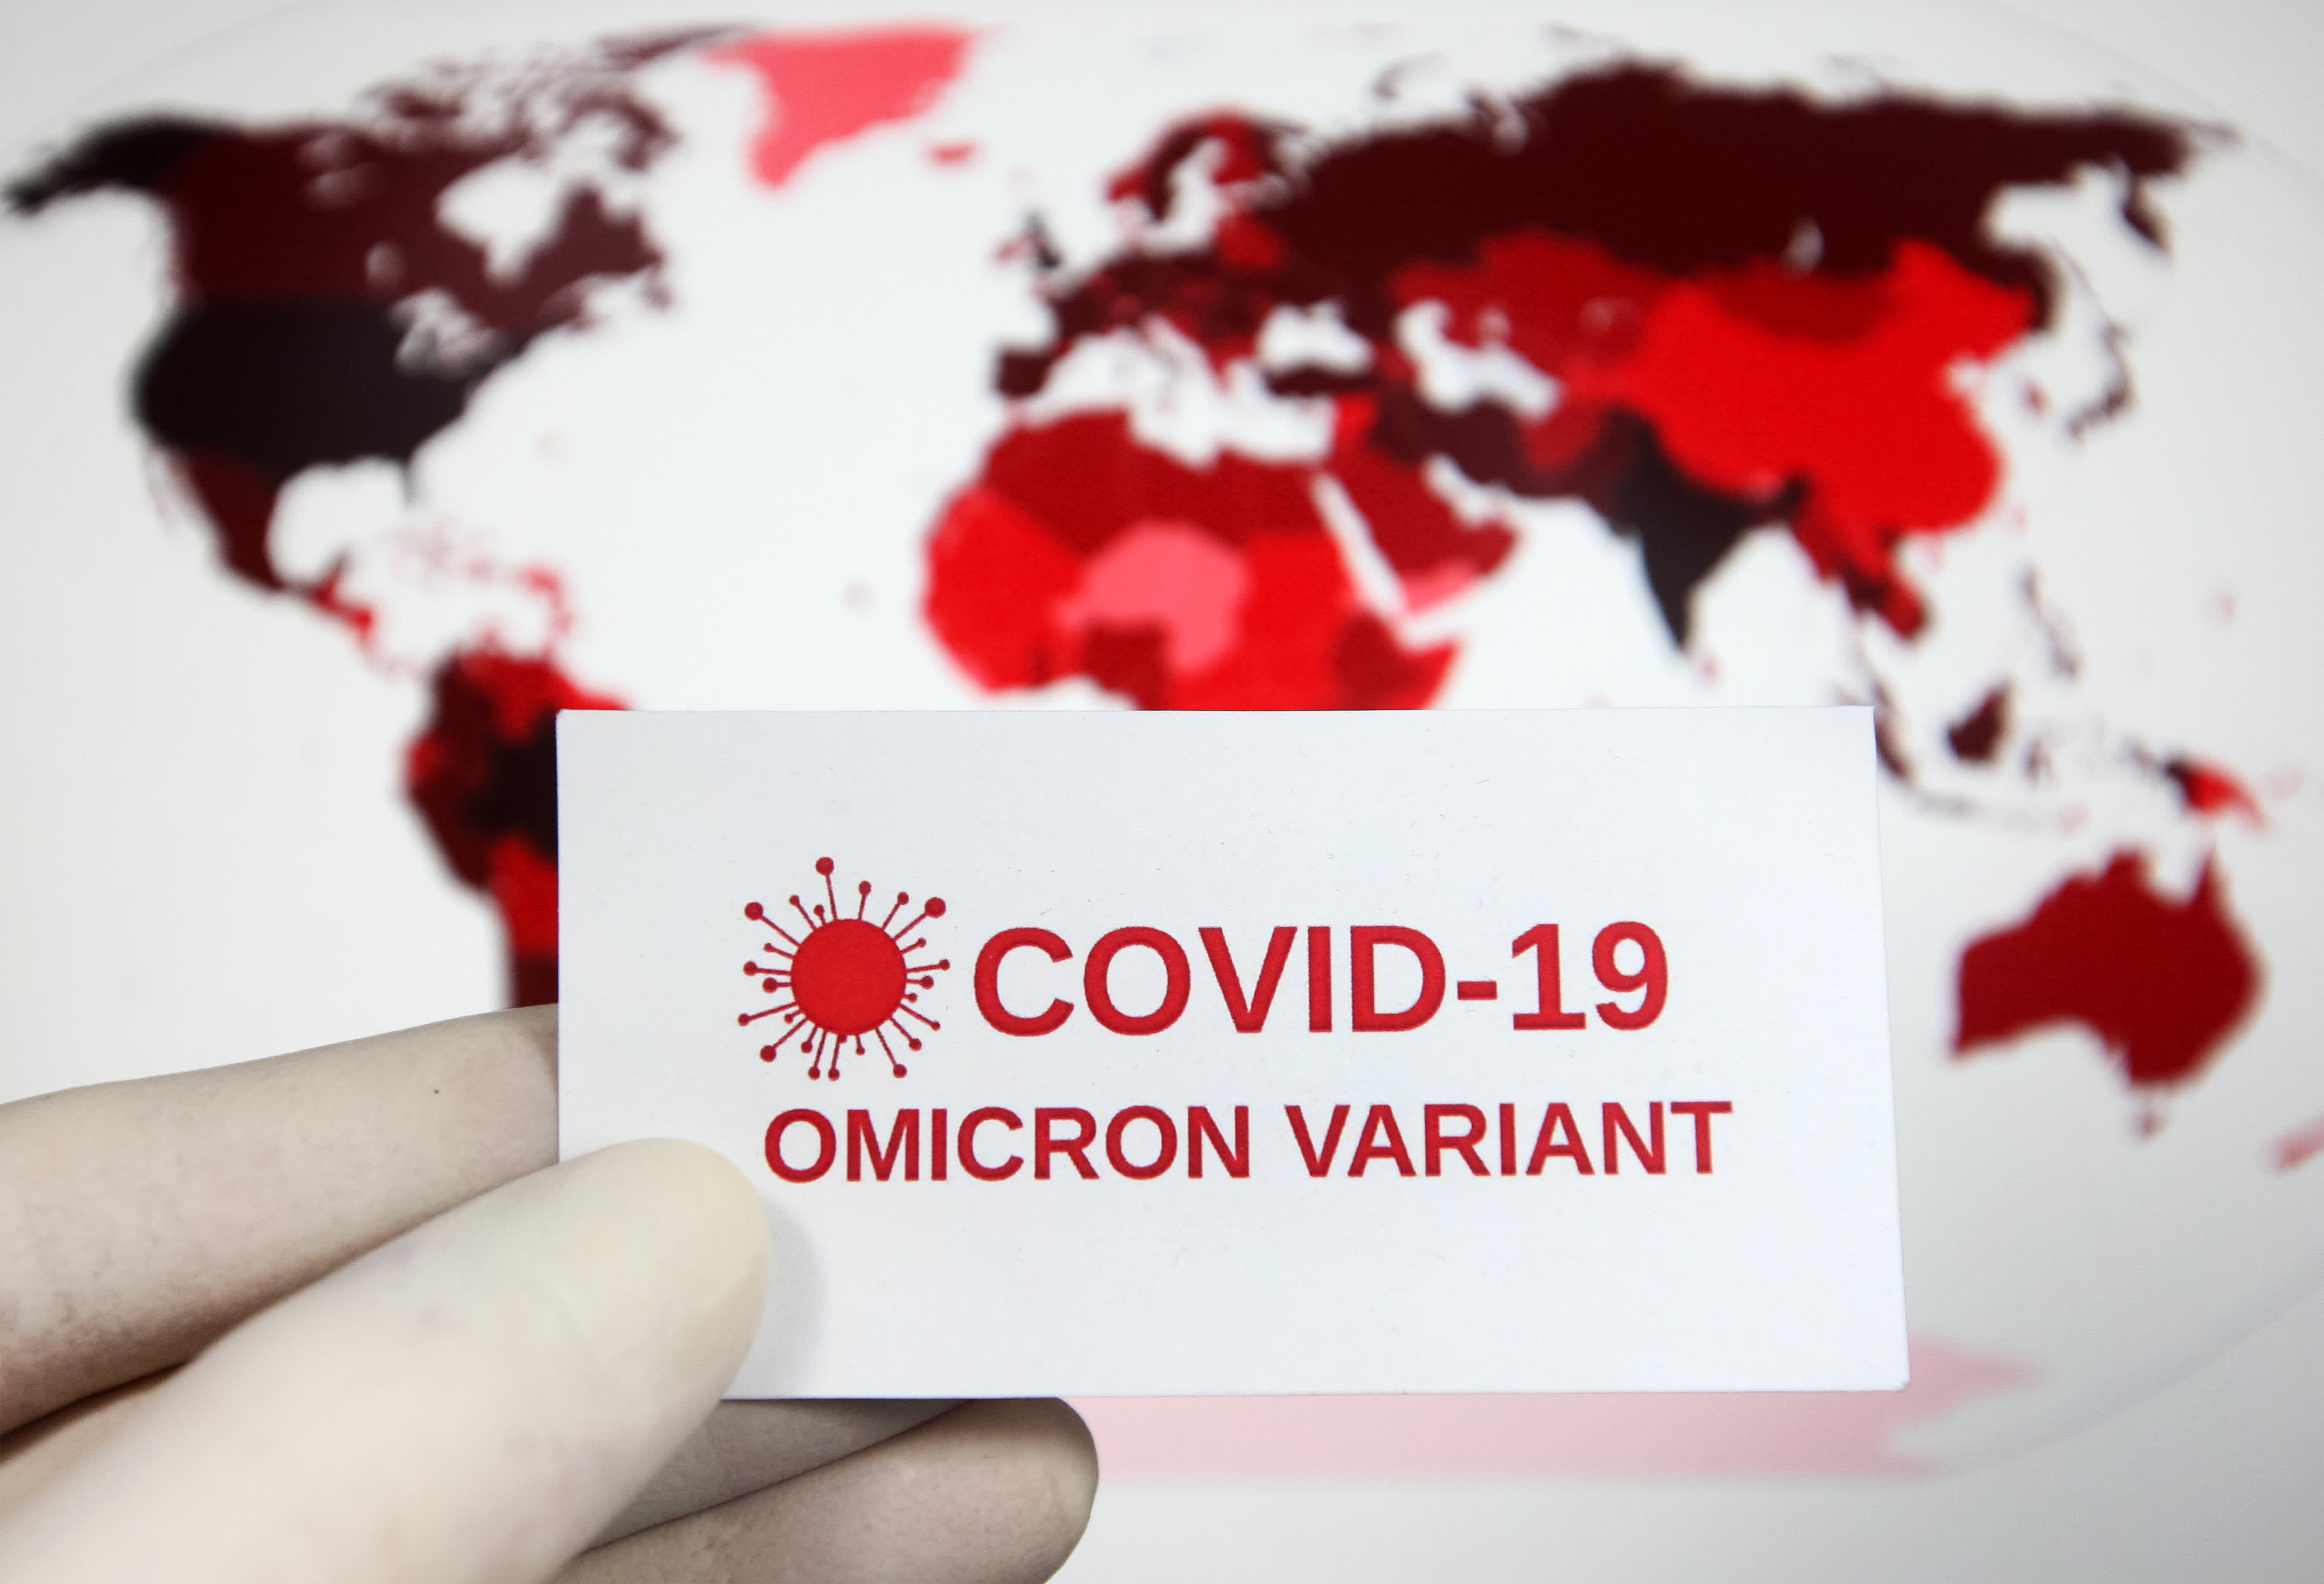 WHO says omicron Covid variant detected in 38 countries, early data suggests it’..